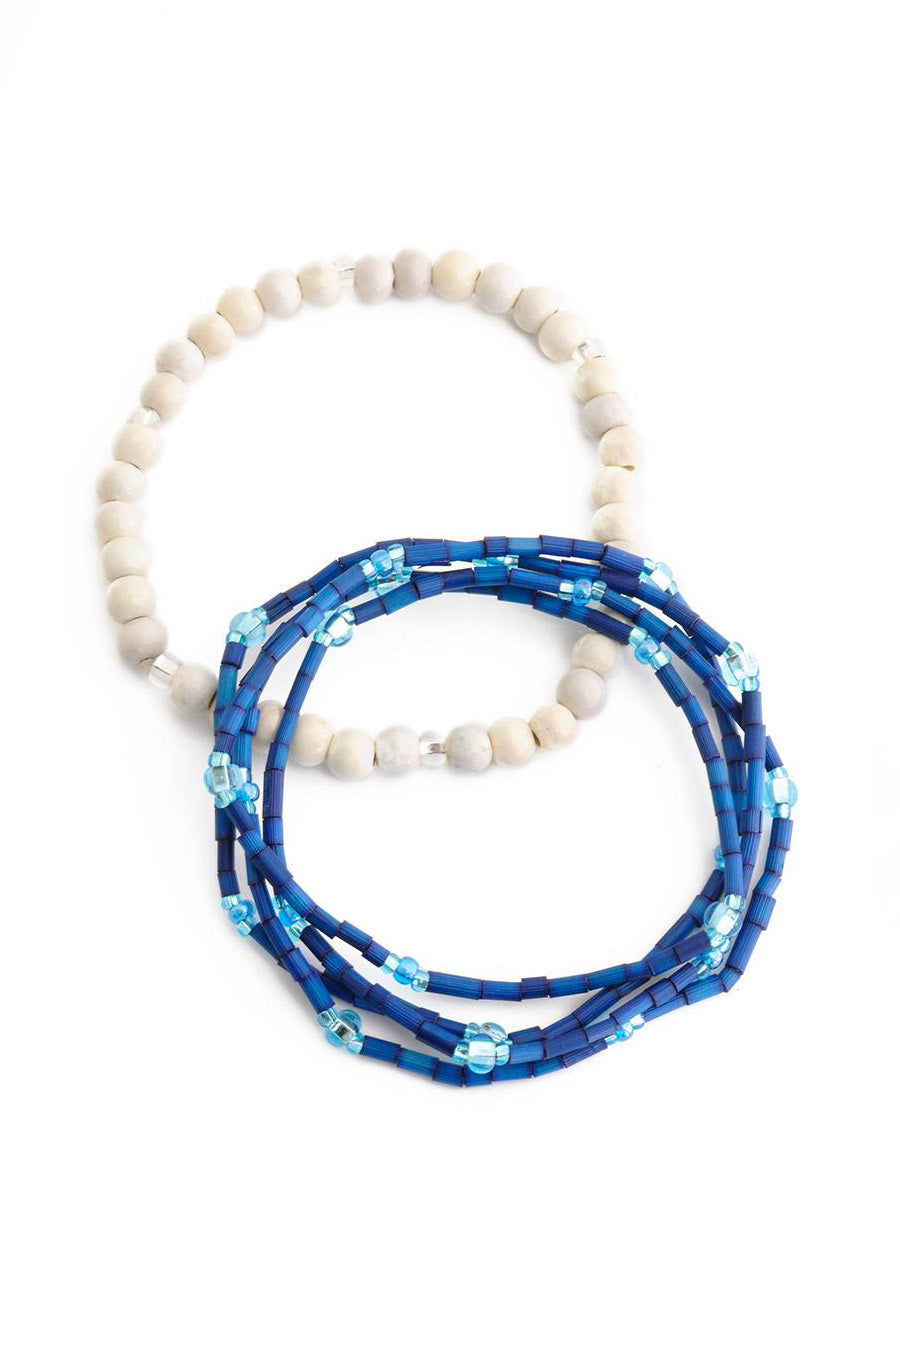 Zulugrass & Natural Porcelain Bracelet Duet - Available in 4 Colors